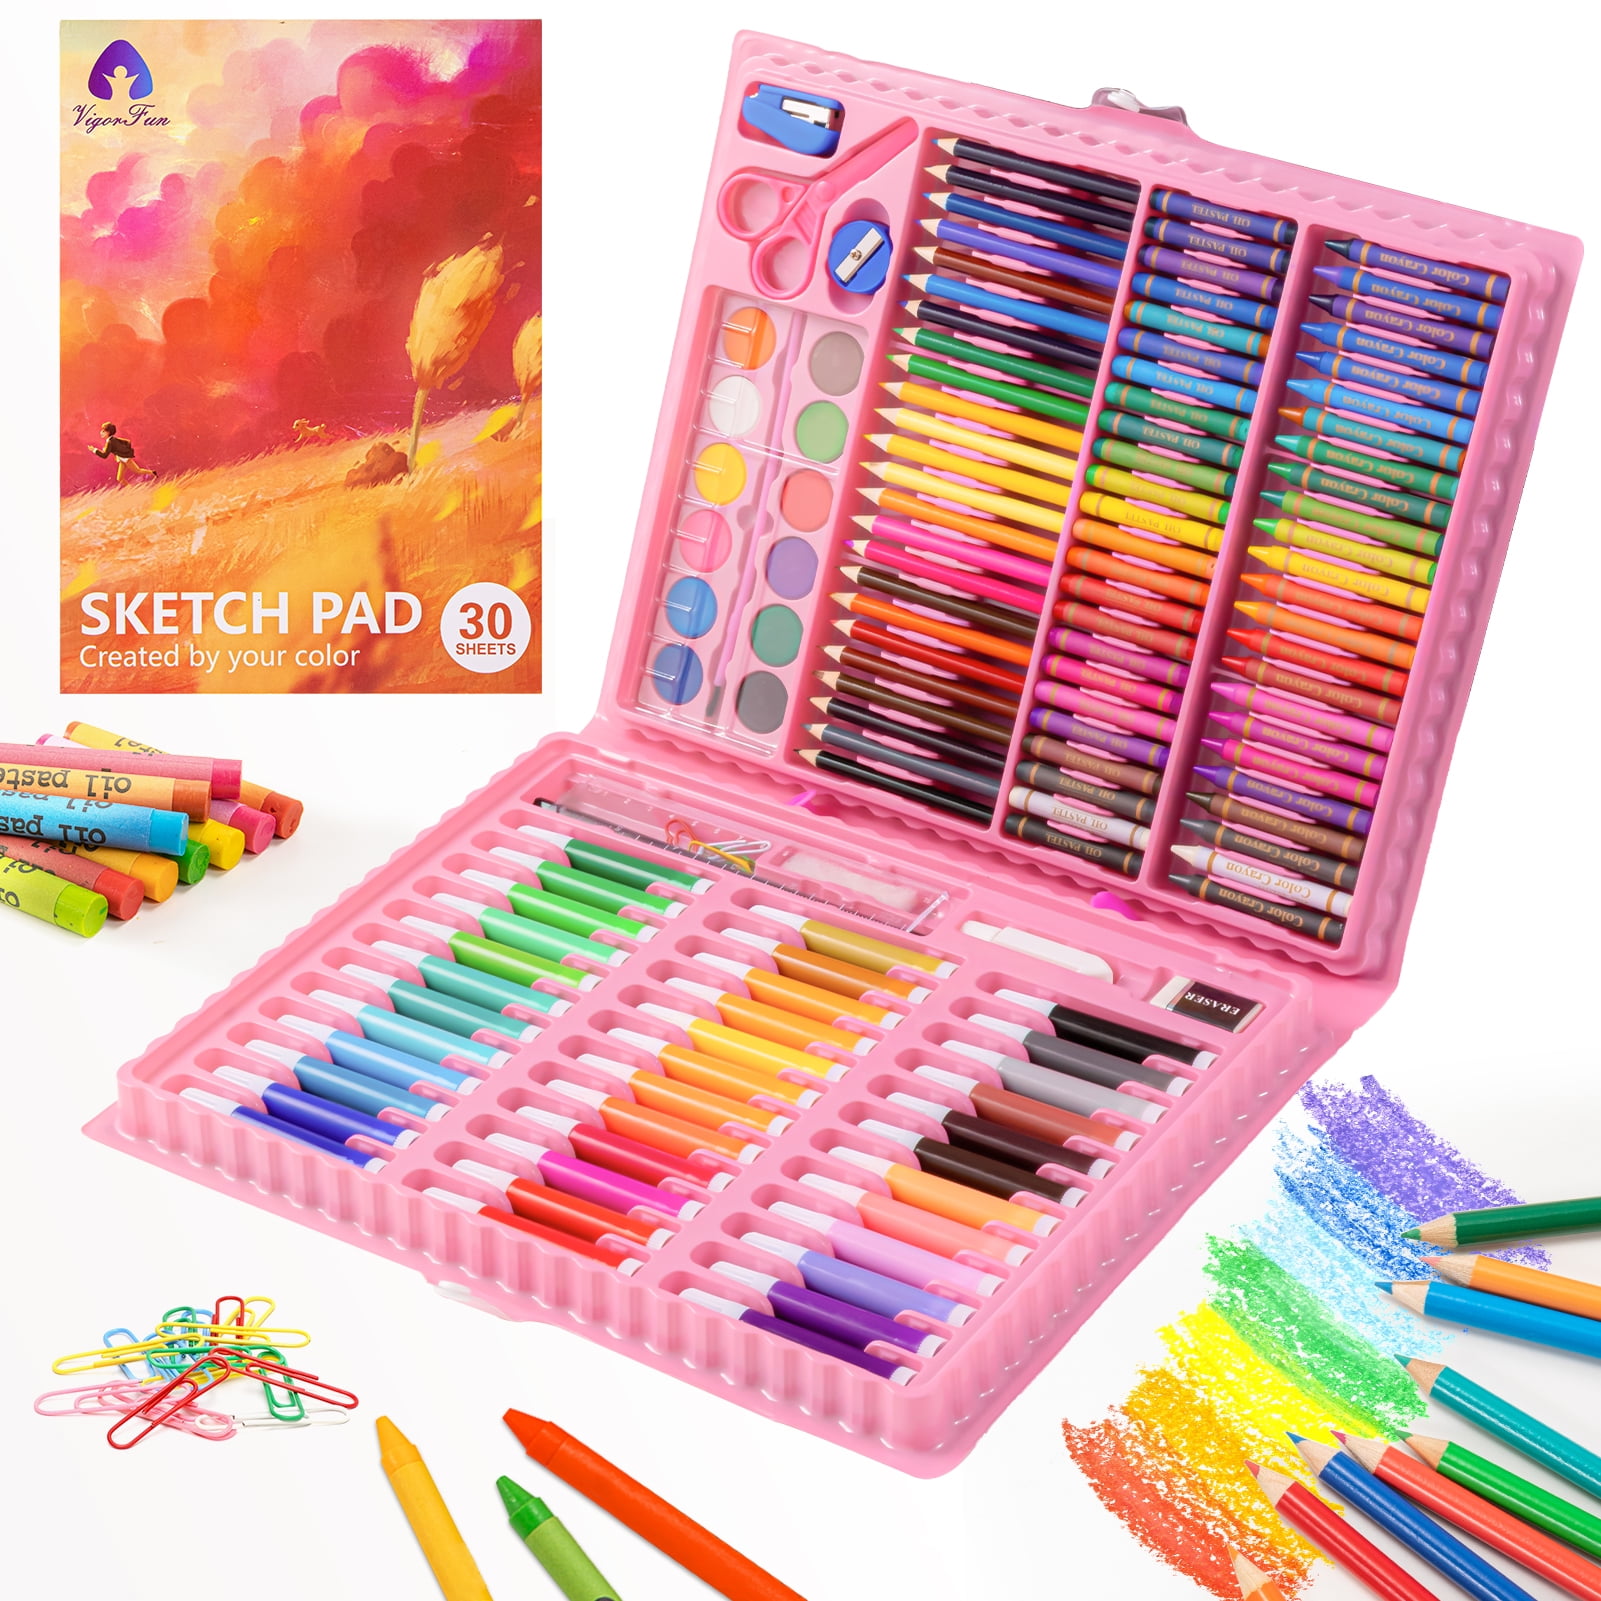 Art Supplies, 151 Piece Drawing Art kit, Child Gifts Art Set Case with  Double Sided Trifold Easel, Includes Oil Pastels, Crayons, Colored Pencils